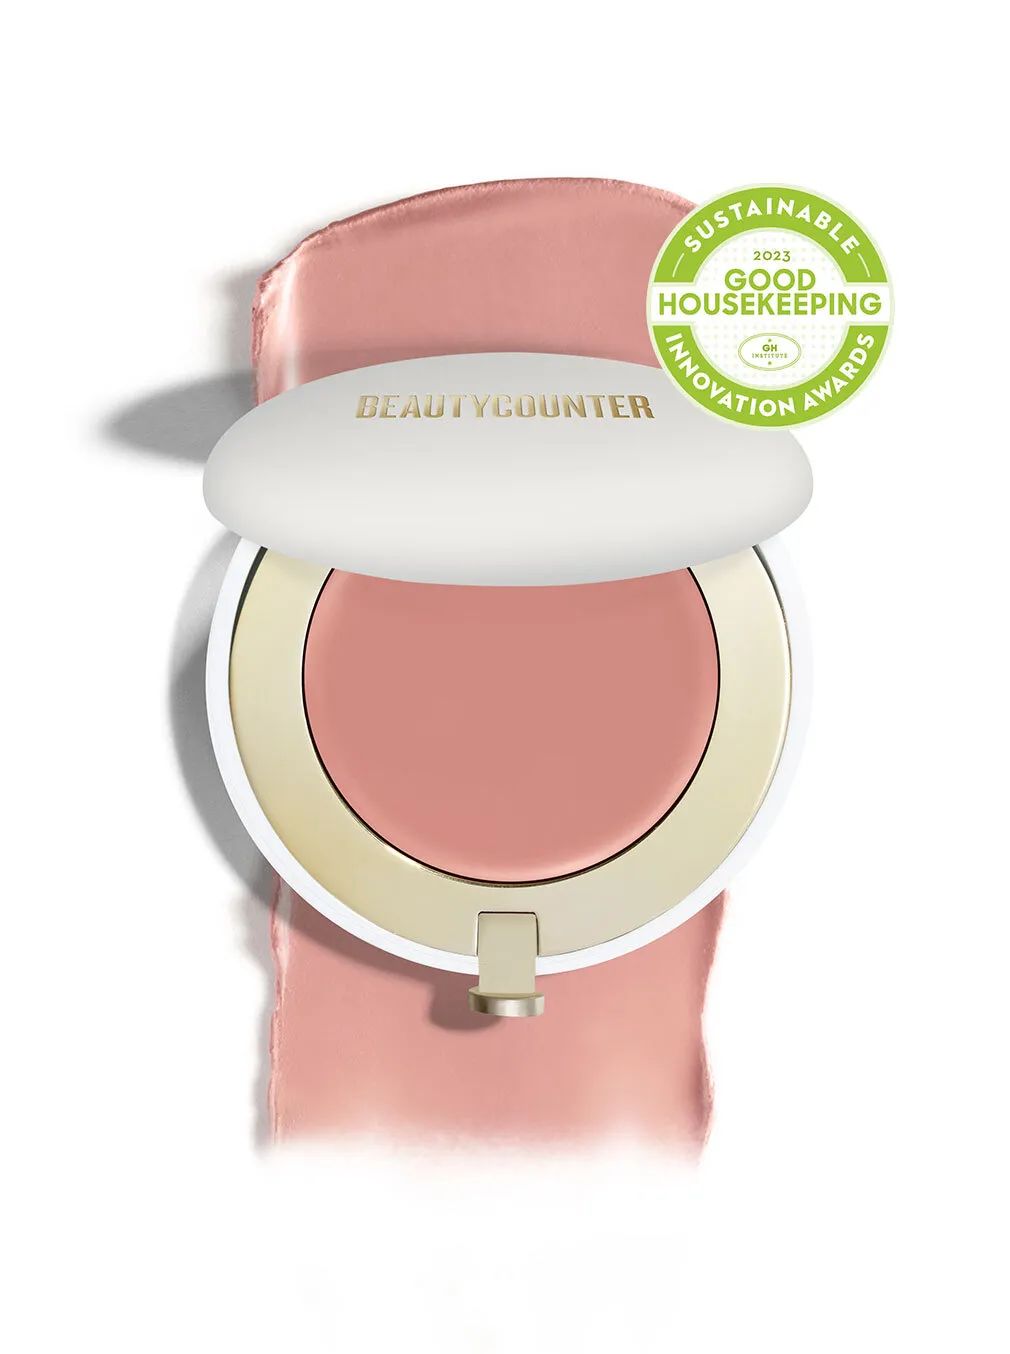 Cheeky Clean Cream Blush - Beautycounter - Skin Care, Makeup, Bath and Body and more! | Beautycounter.com